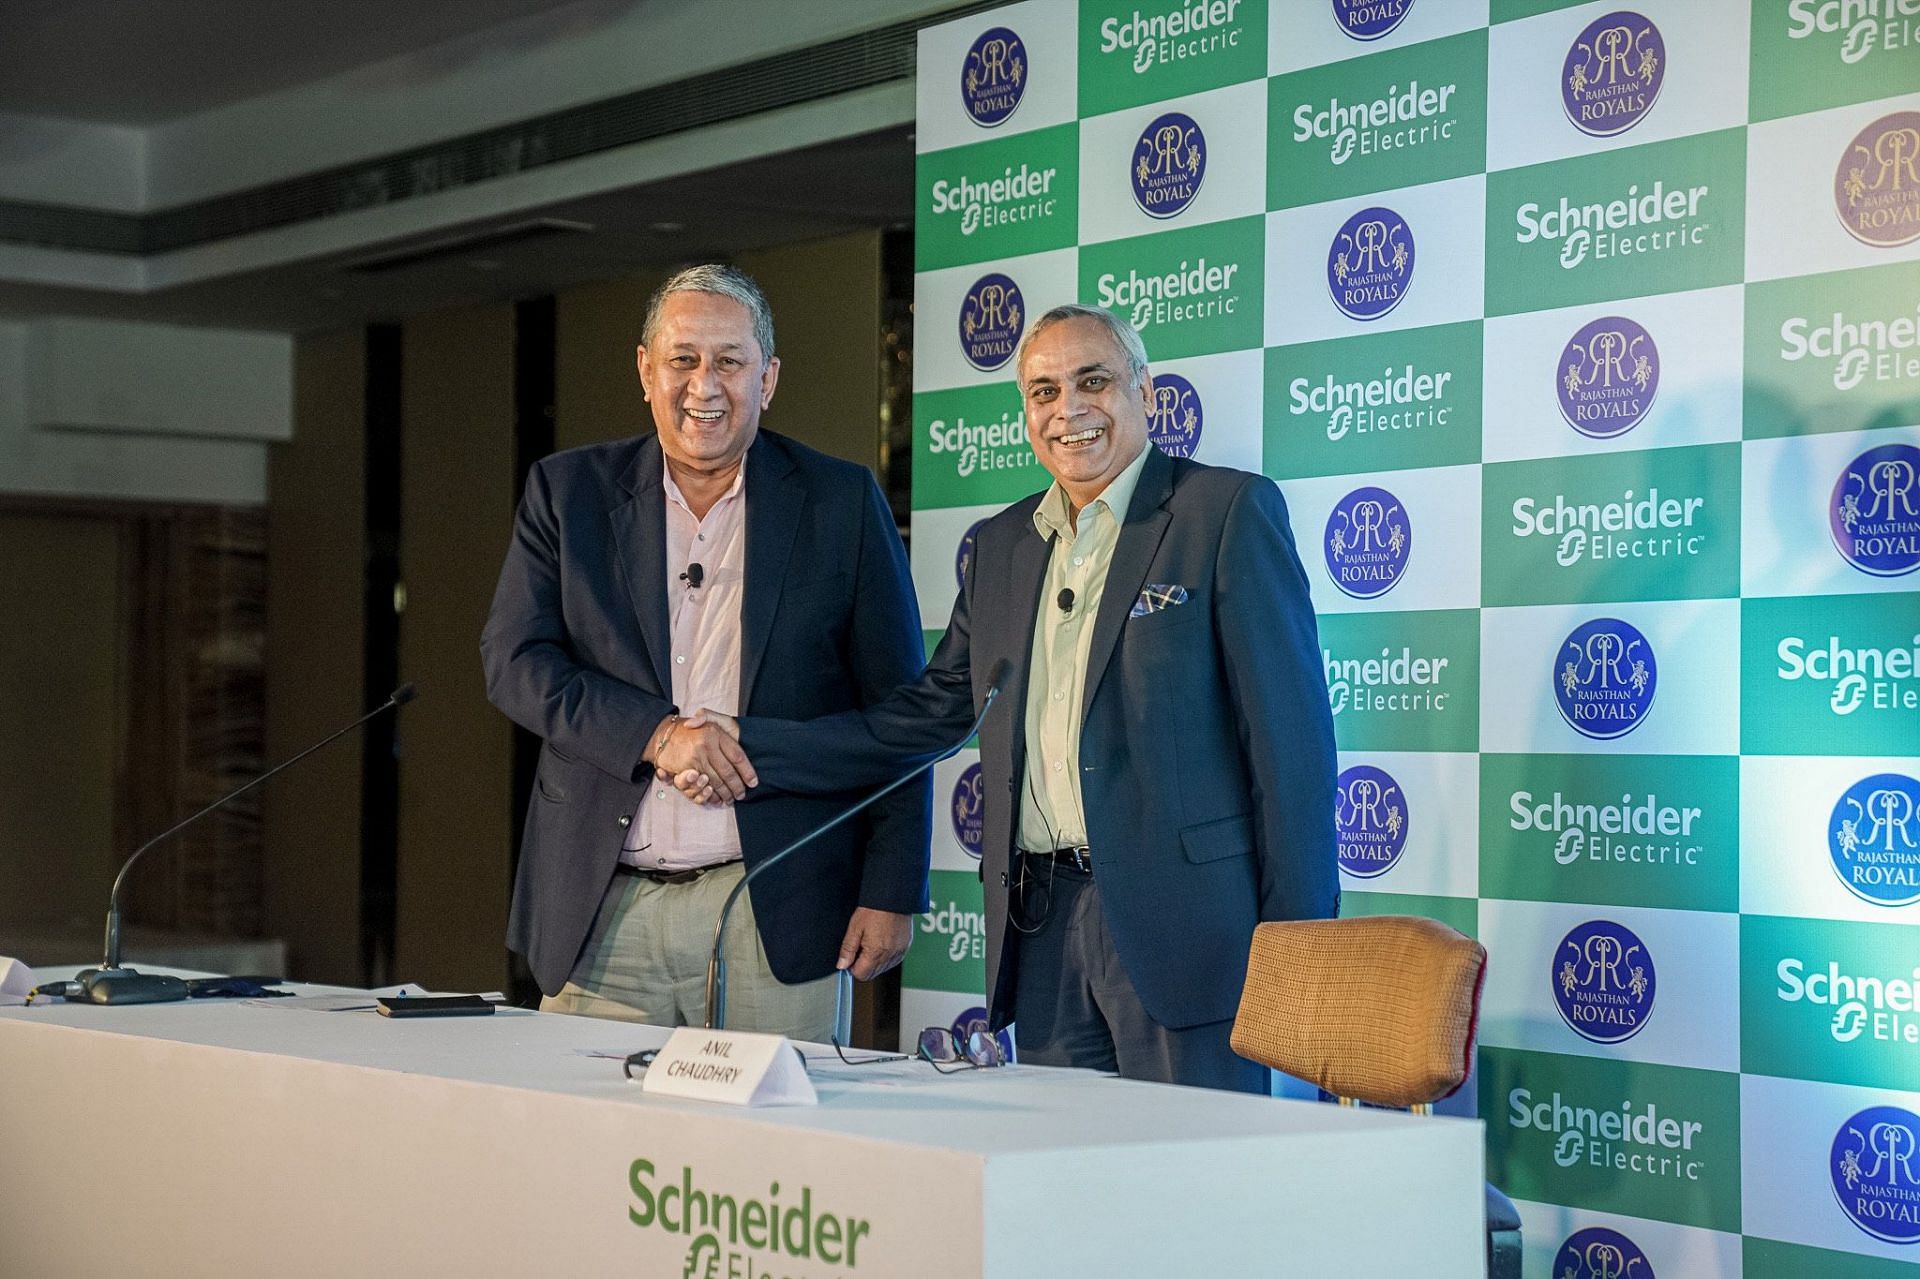 RR chairman Ranjit Barthakur (L) with Schneider Electric MD and CEO Anil Chaudhry during the press conference.